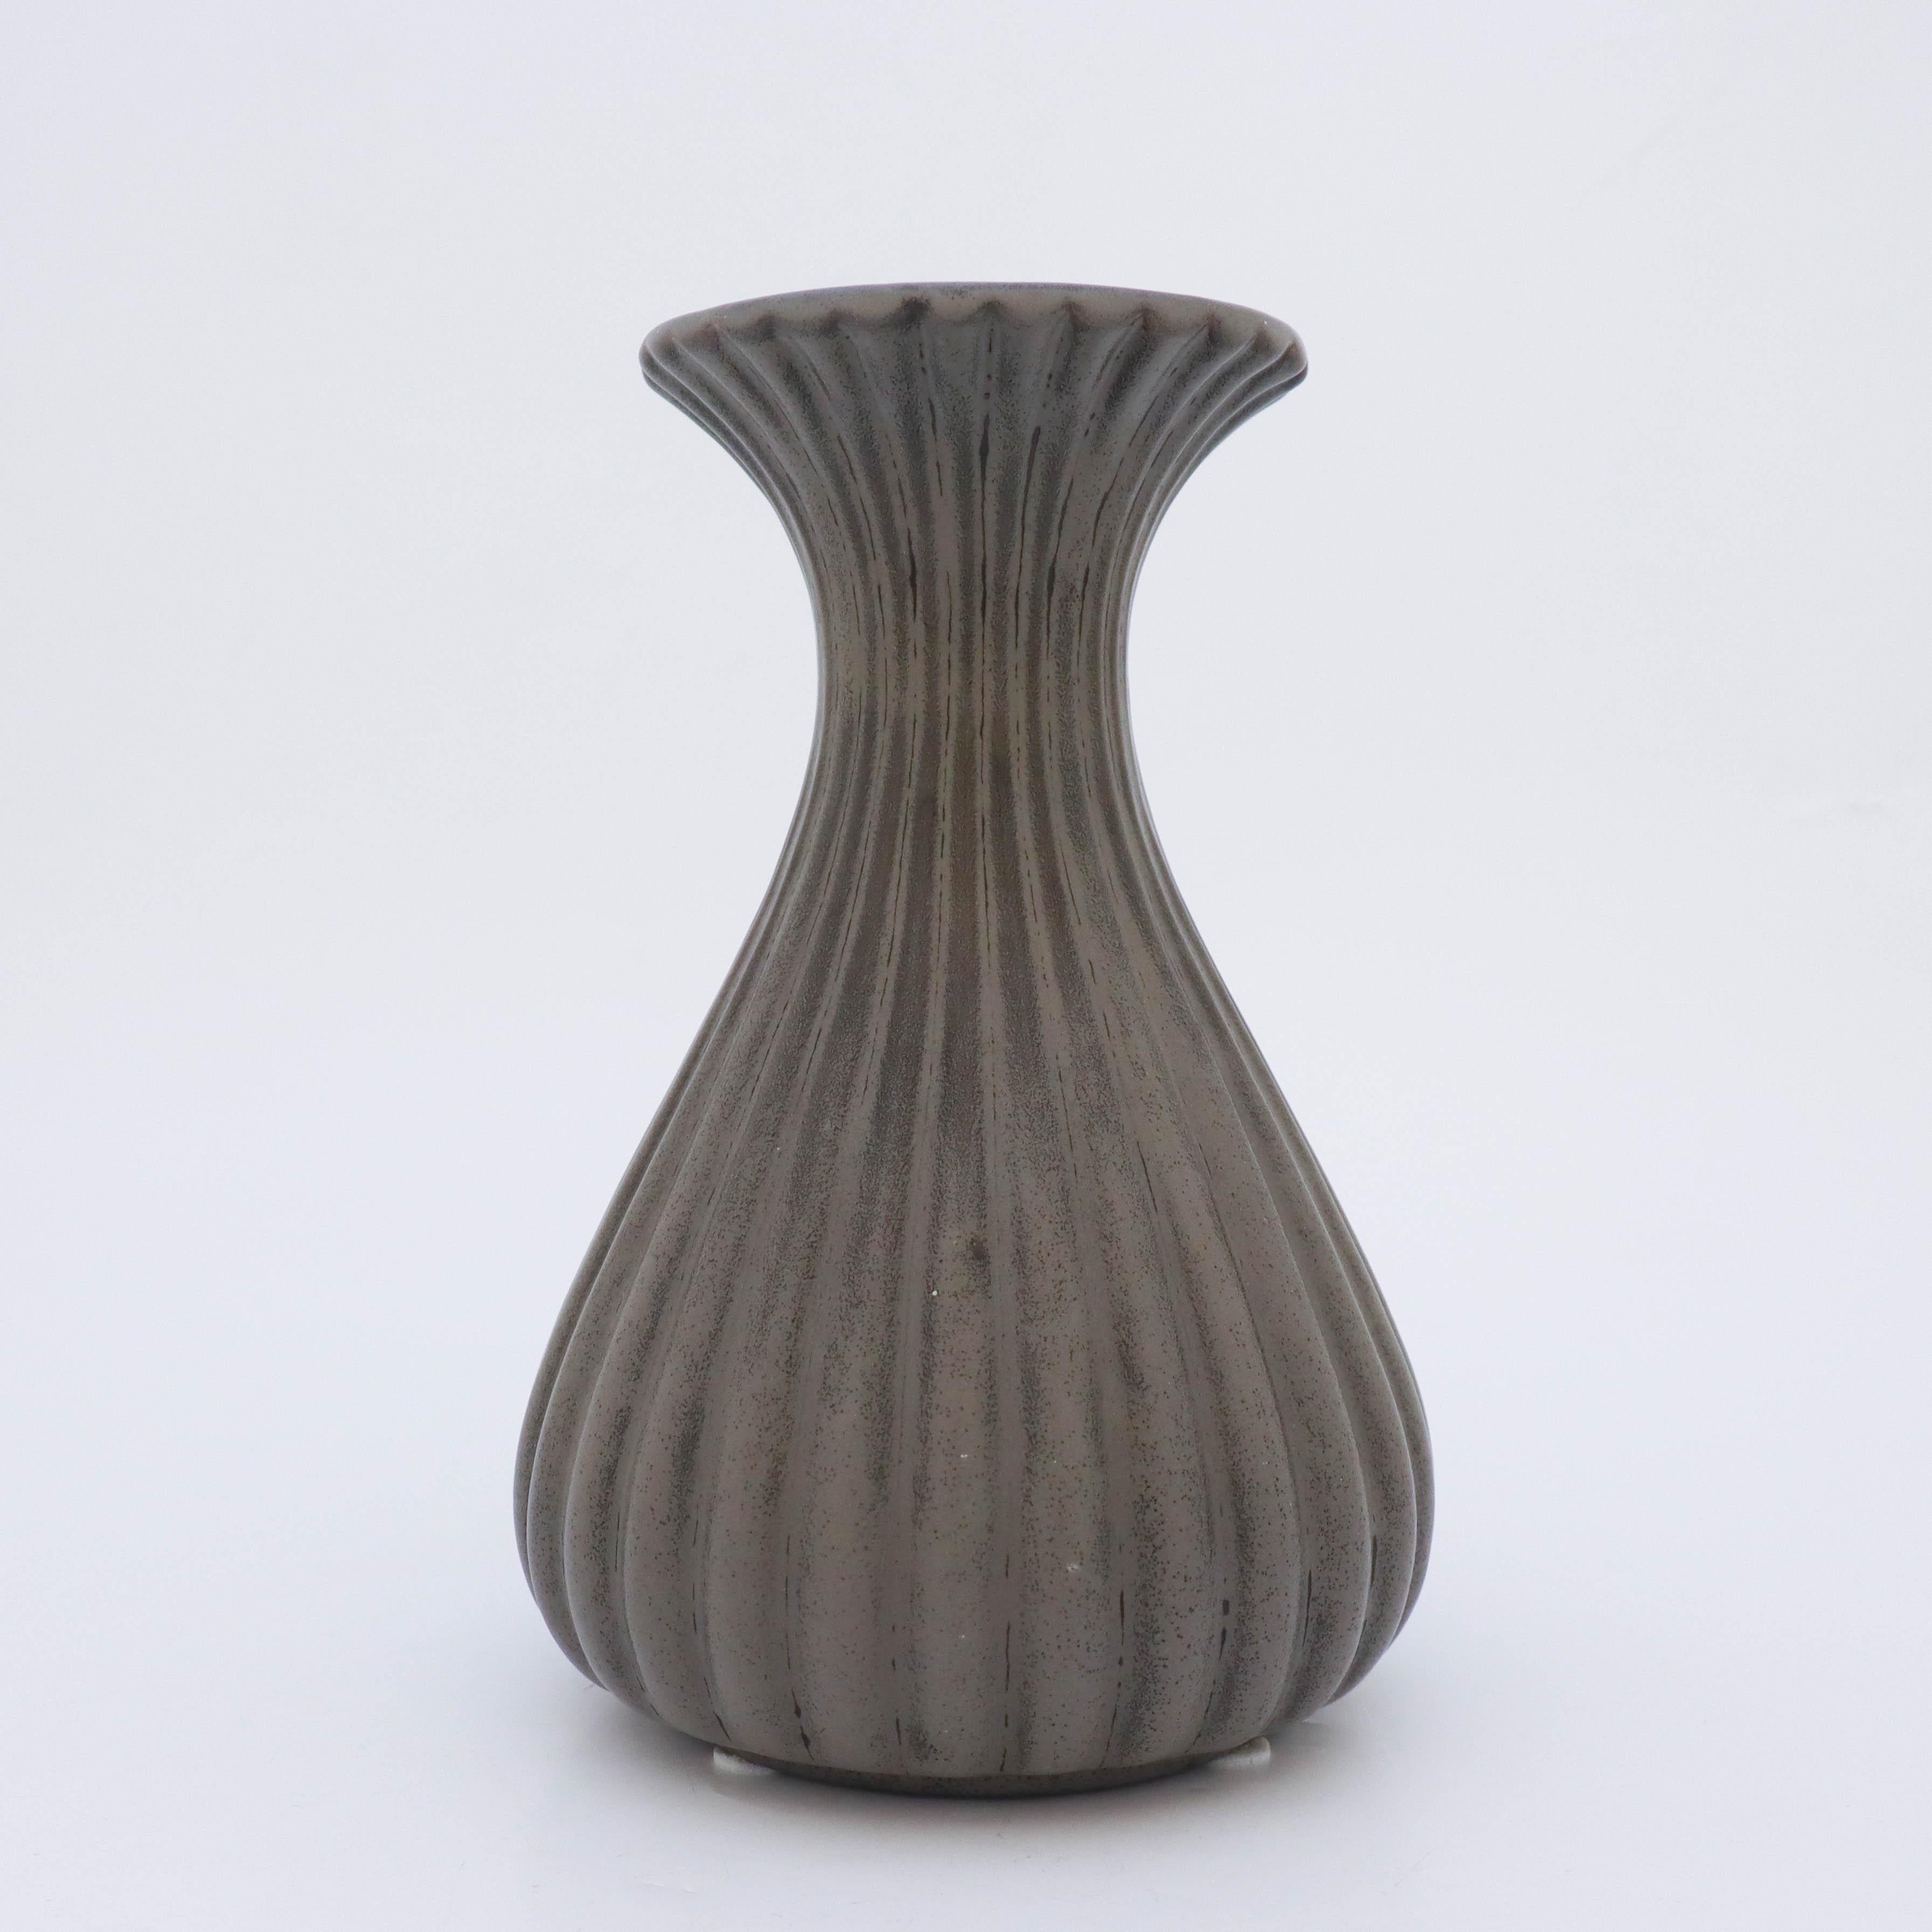 A beautiful grey vase designed by Ewald Dahlskog at Bo Fajans in Gefle in the 1930s.